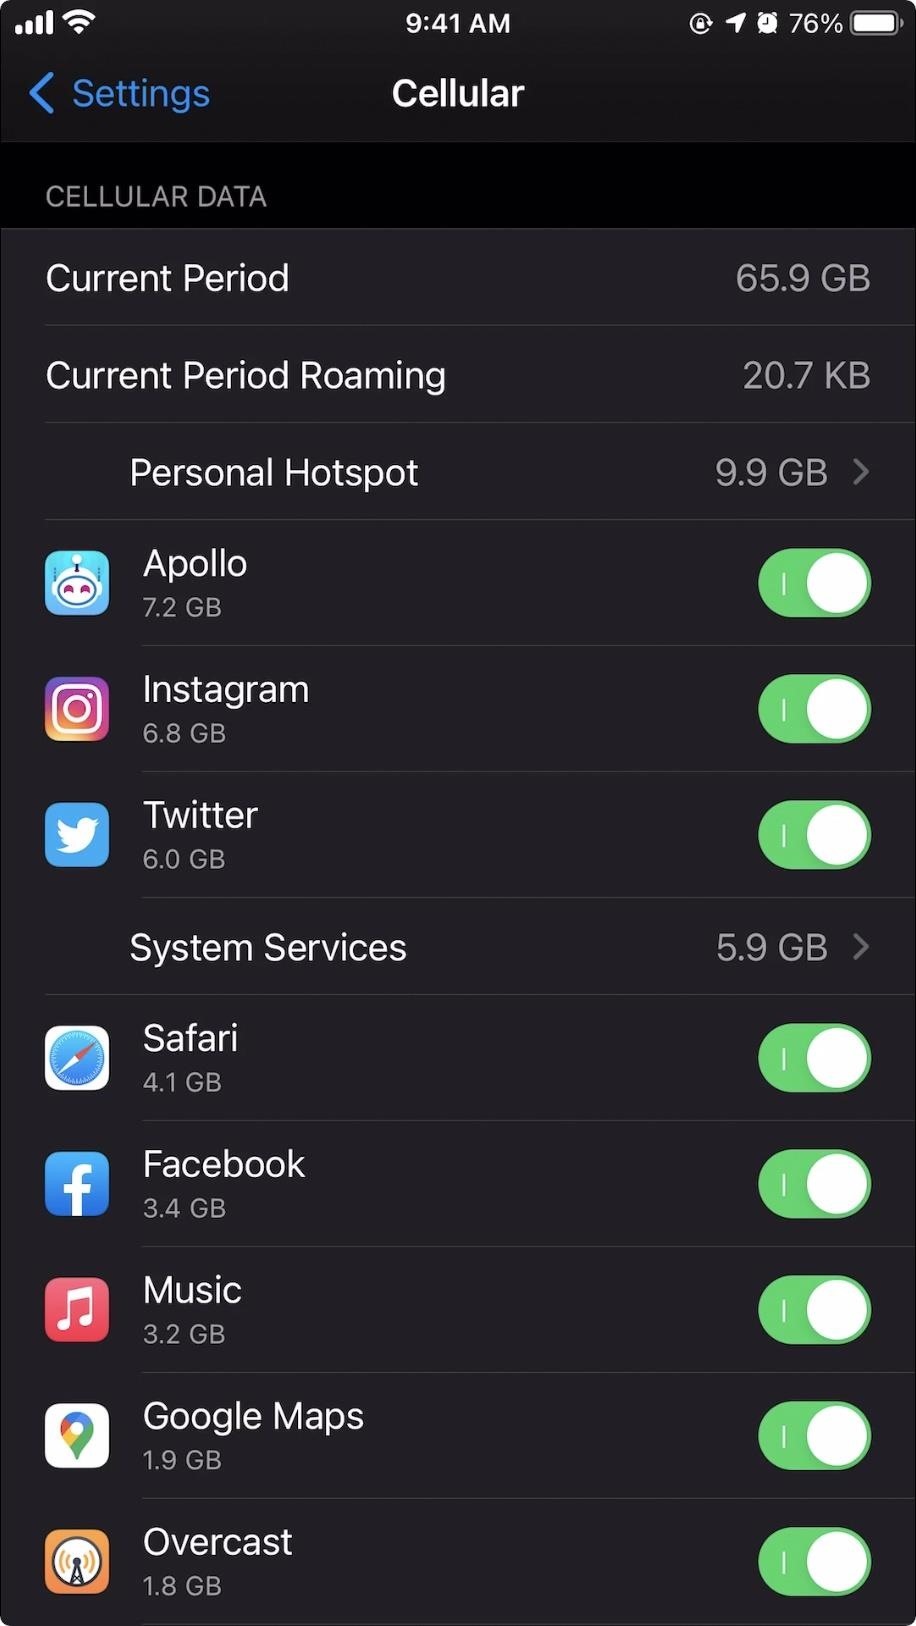 You Can Block Any App from Using Up Your iPhone's Precious Mobile Data by Doing This